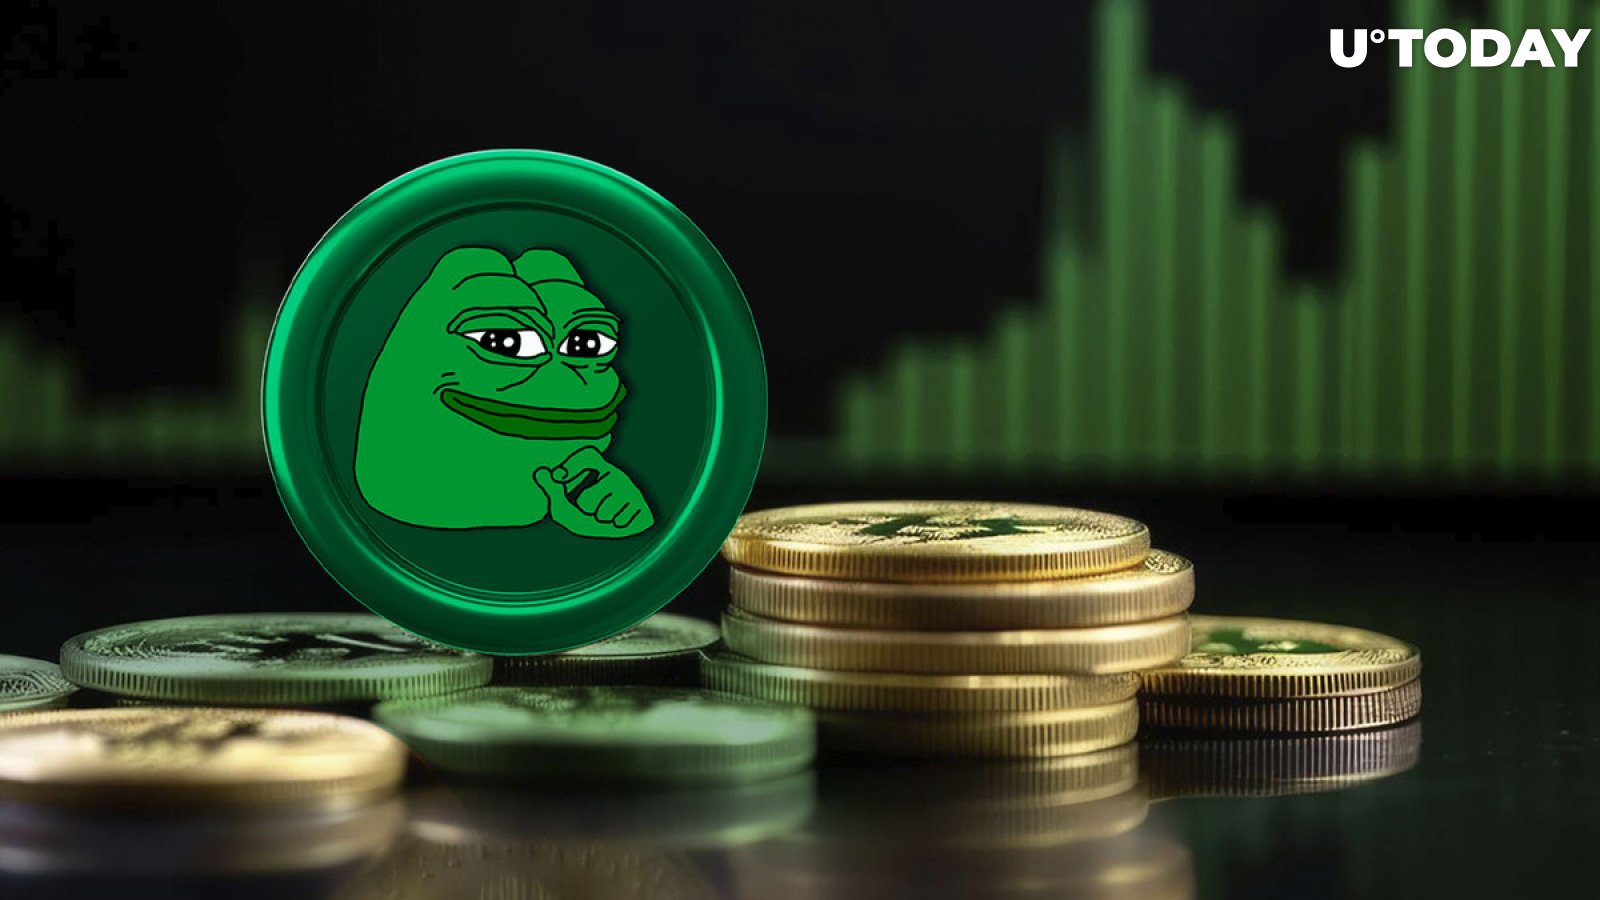 PEPE Skyrockets 300% in Volume Amid Epic Surge to New ATH